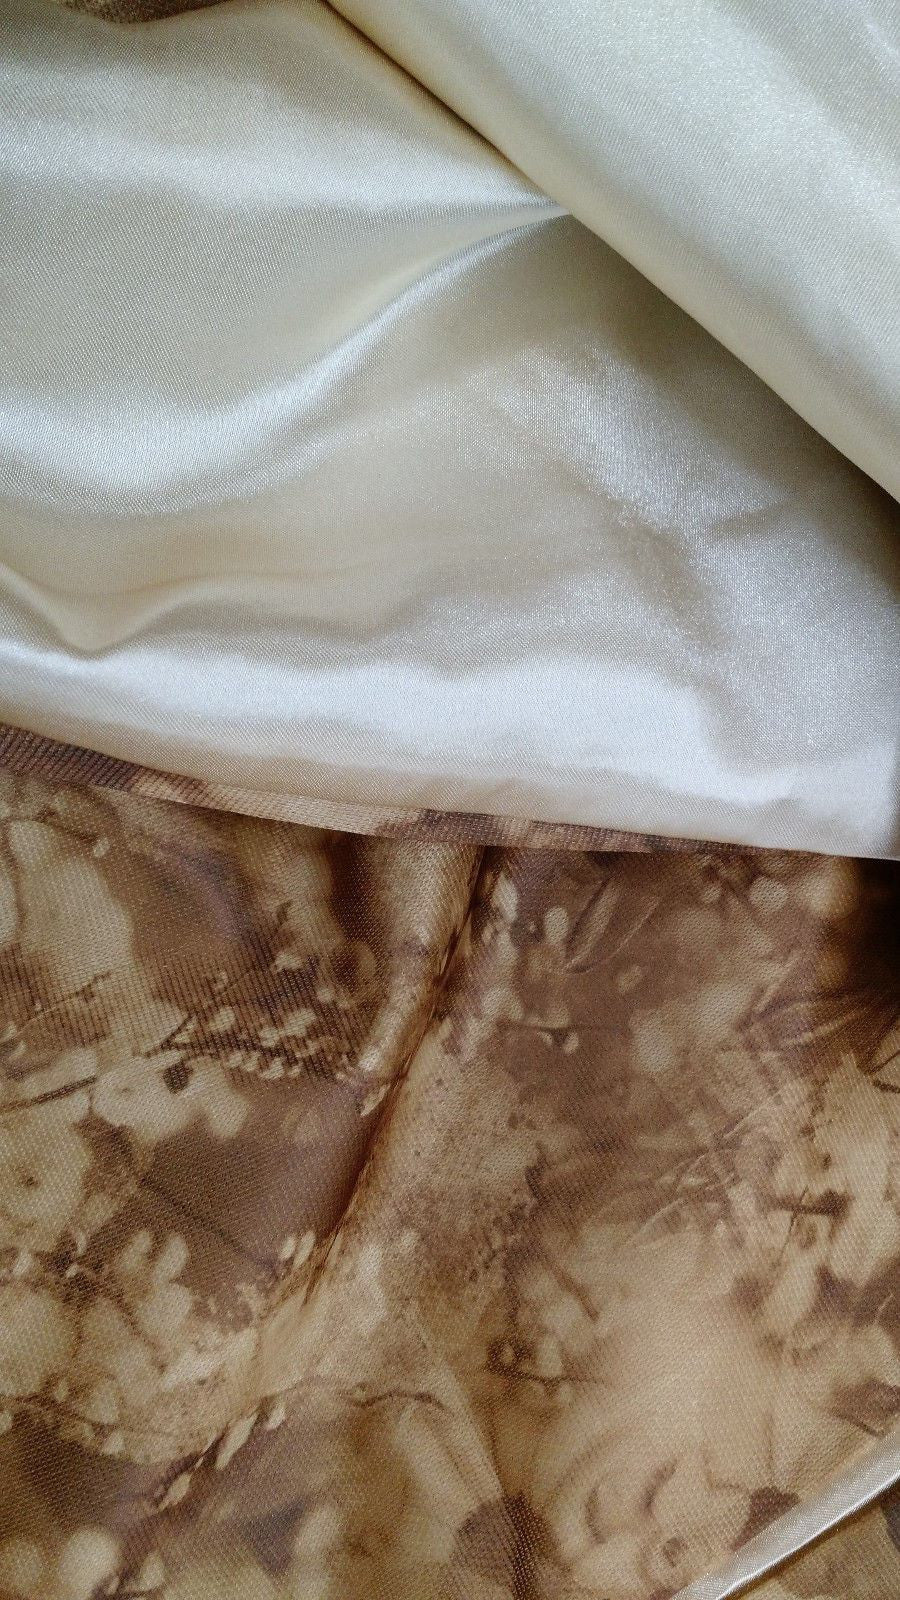 Coffee Blossoms Floral Shiny Solid Brown Tan Beige Dust Ruffle Pleated Bed Skirt - 14" Drop (BS-BM6118L-1) - Stores Basement - Discount Bedding